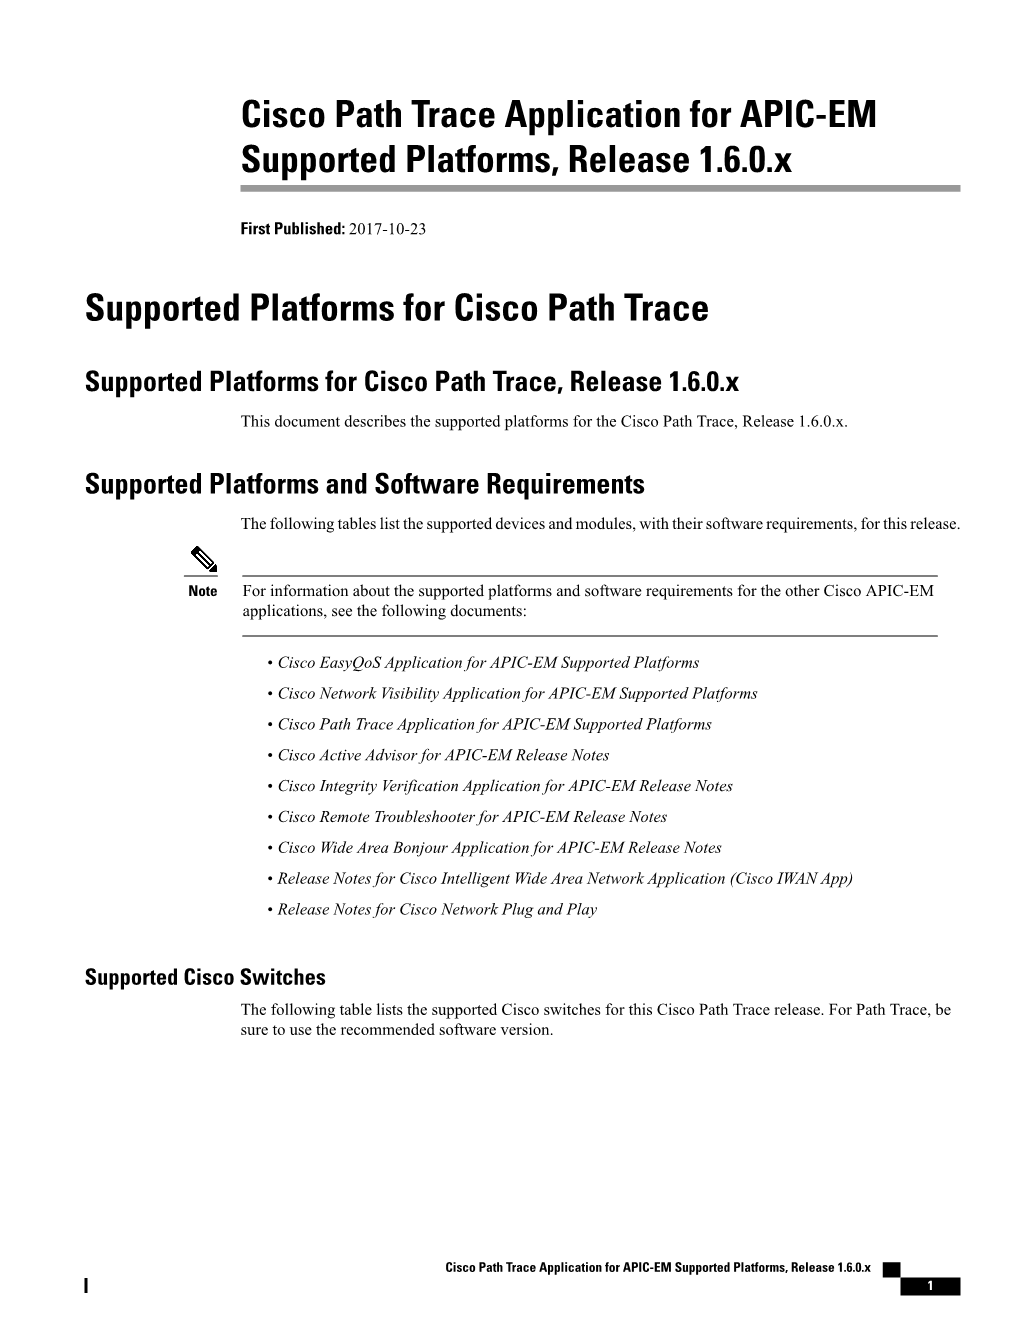 Cisco Path Trace Application for APIC-EM Supported Platforms, Release 1.6.0.X